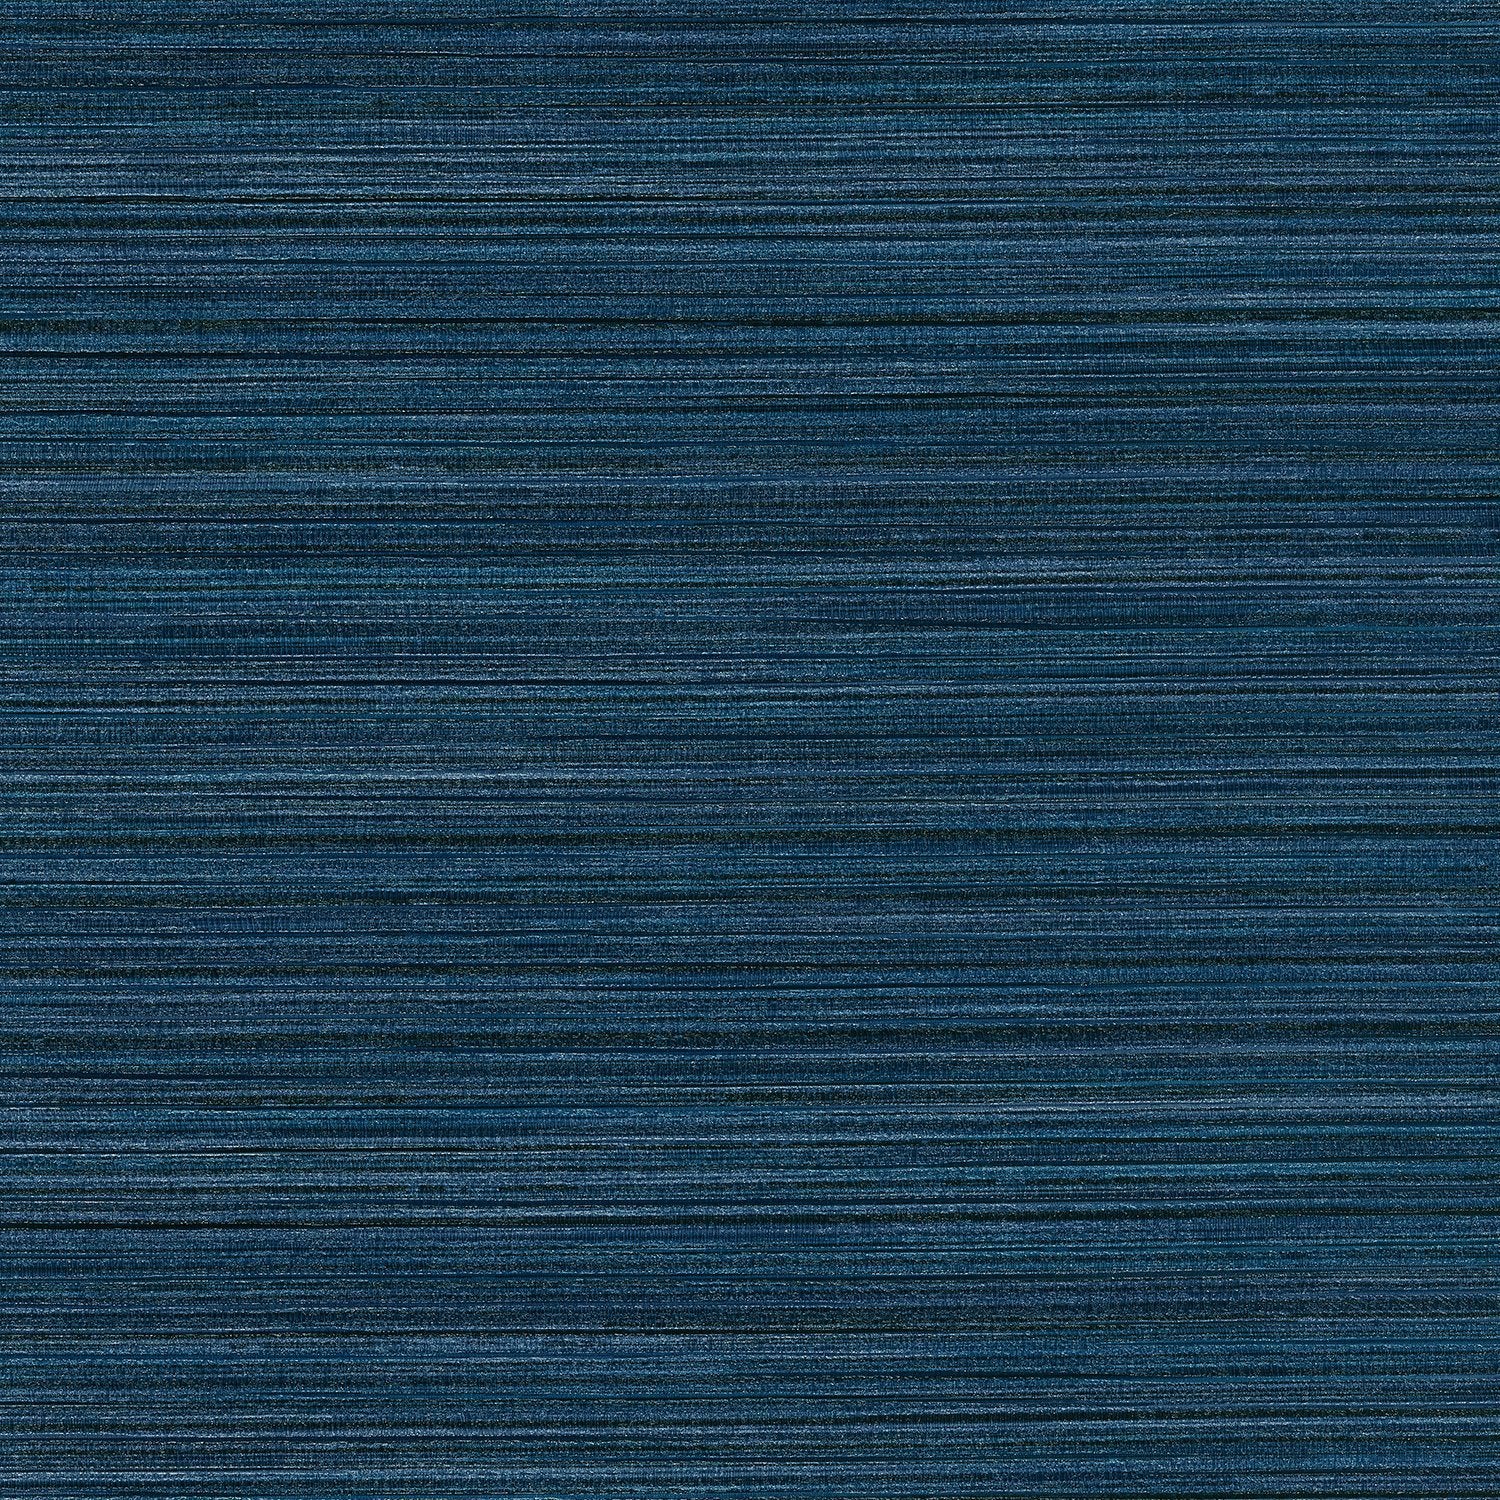 Gallery Silk - Y47744 Prussian Navy - Wallcovering - Vycon - Kube Contract